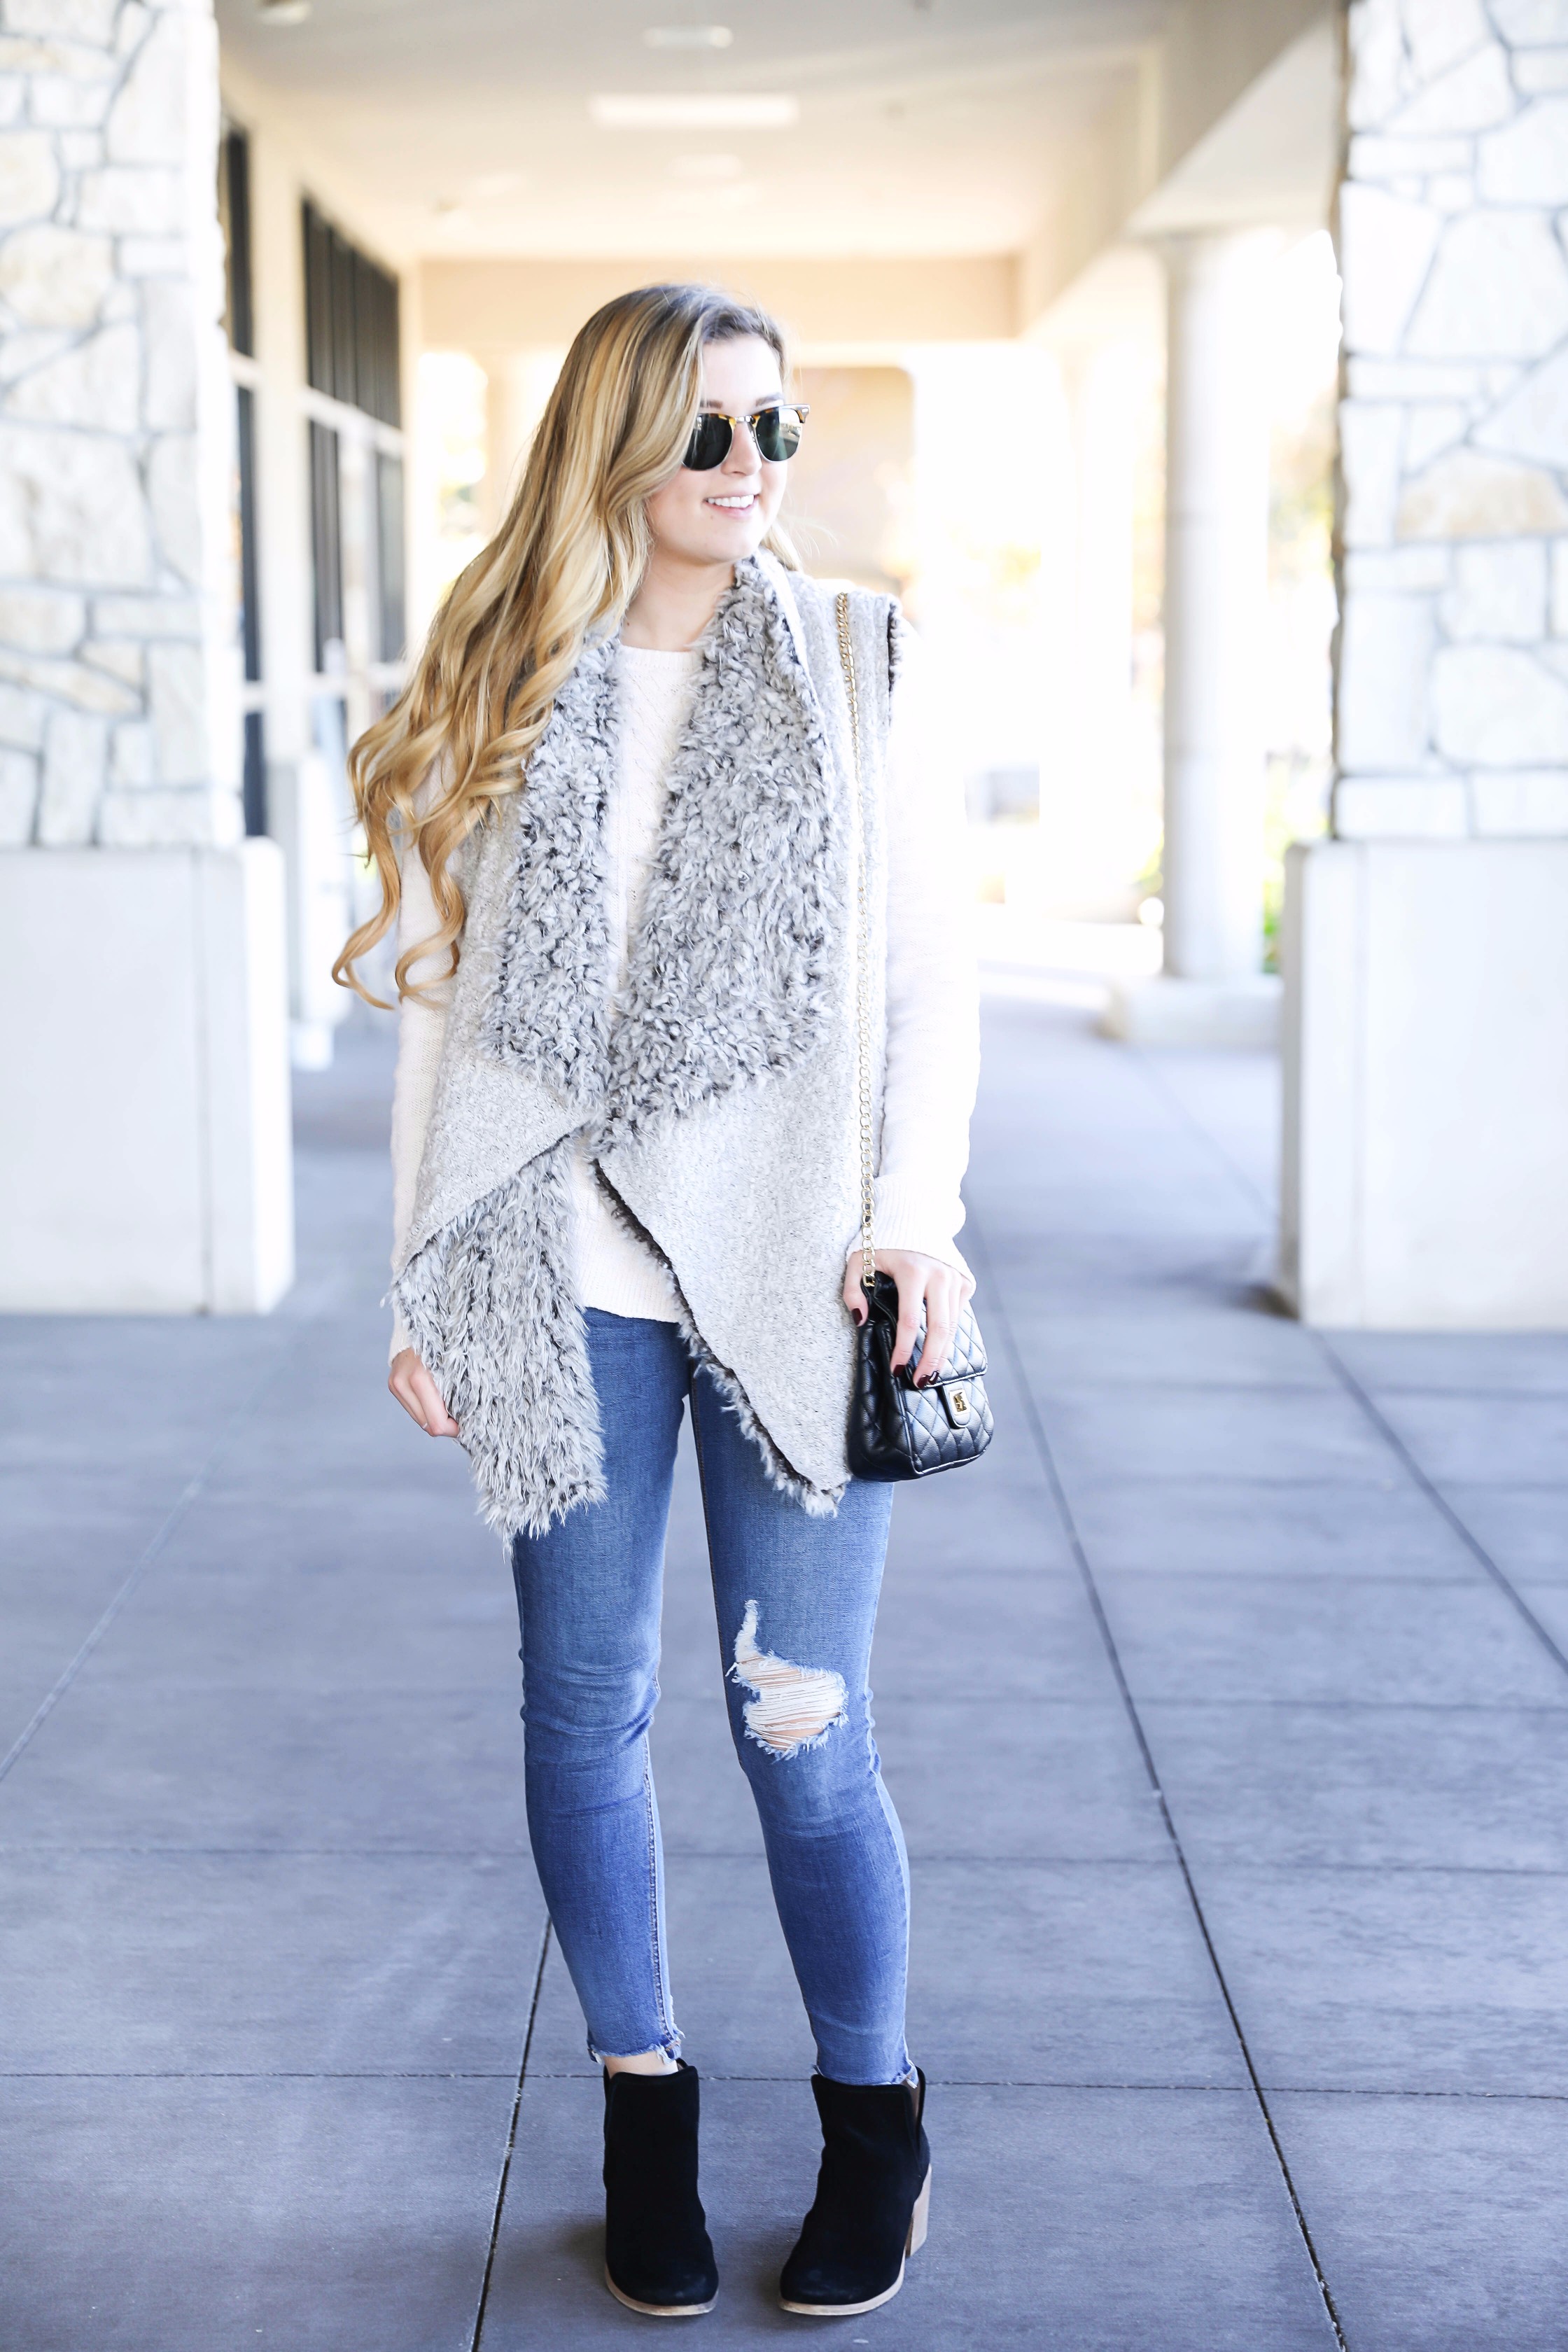 Fuzzy vest with cable knit sweater! Paired with my favorite ripped jeans and clubmaster sunglasses. These black booties are the best! Details on fashion blog daily dose of charm by lauren lindmark